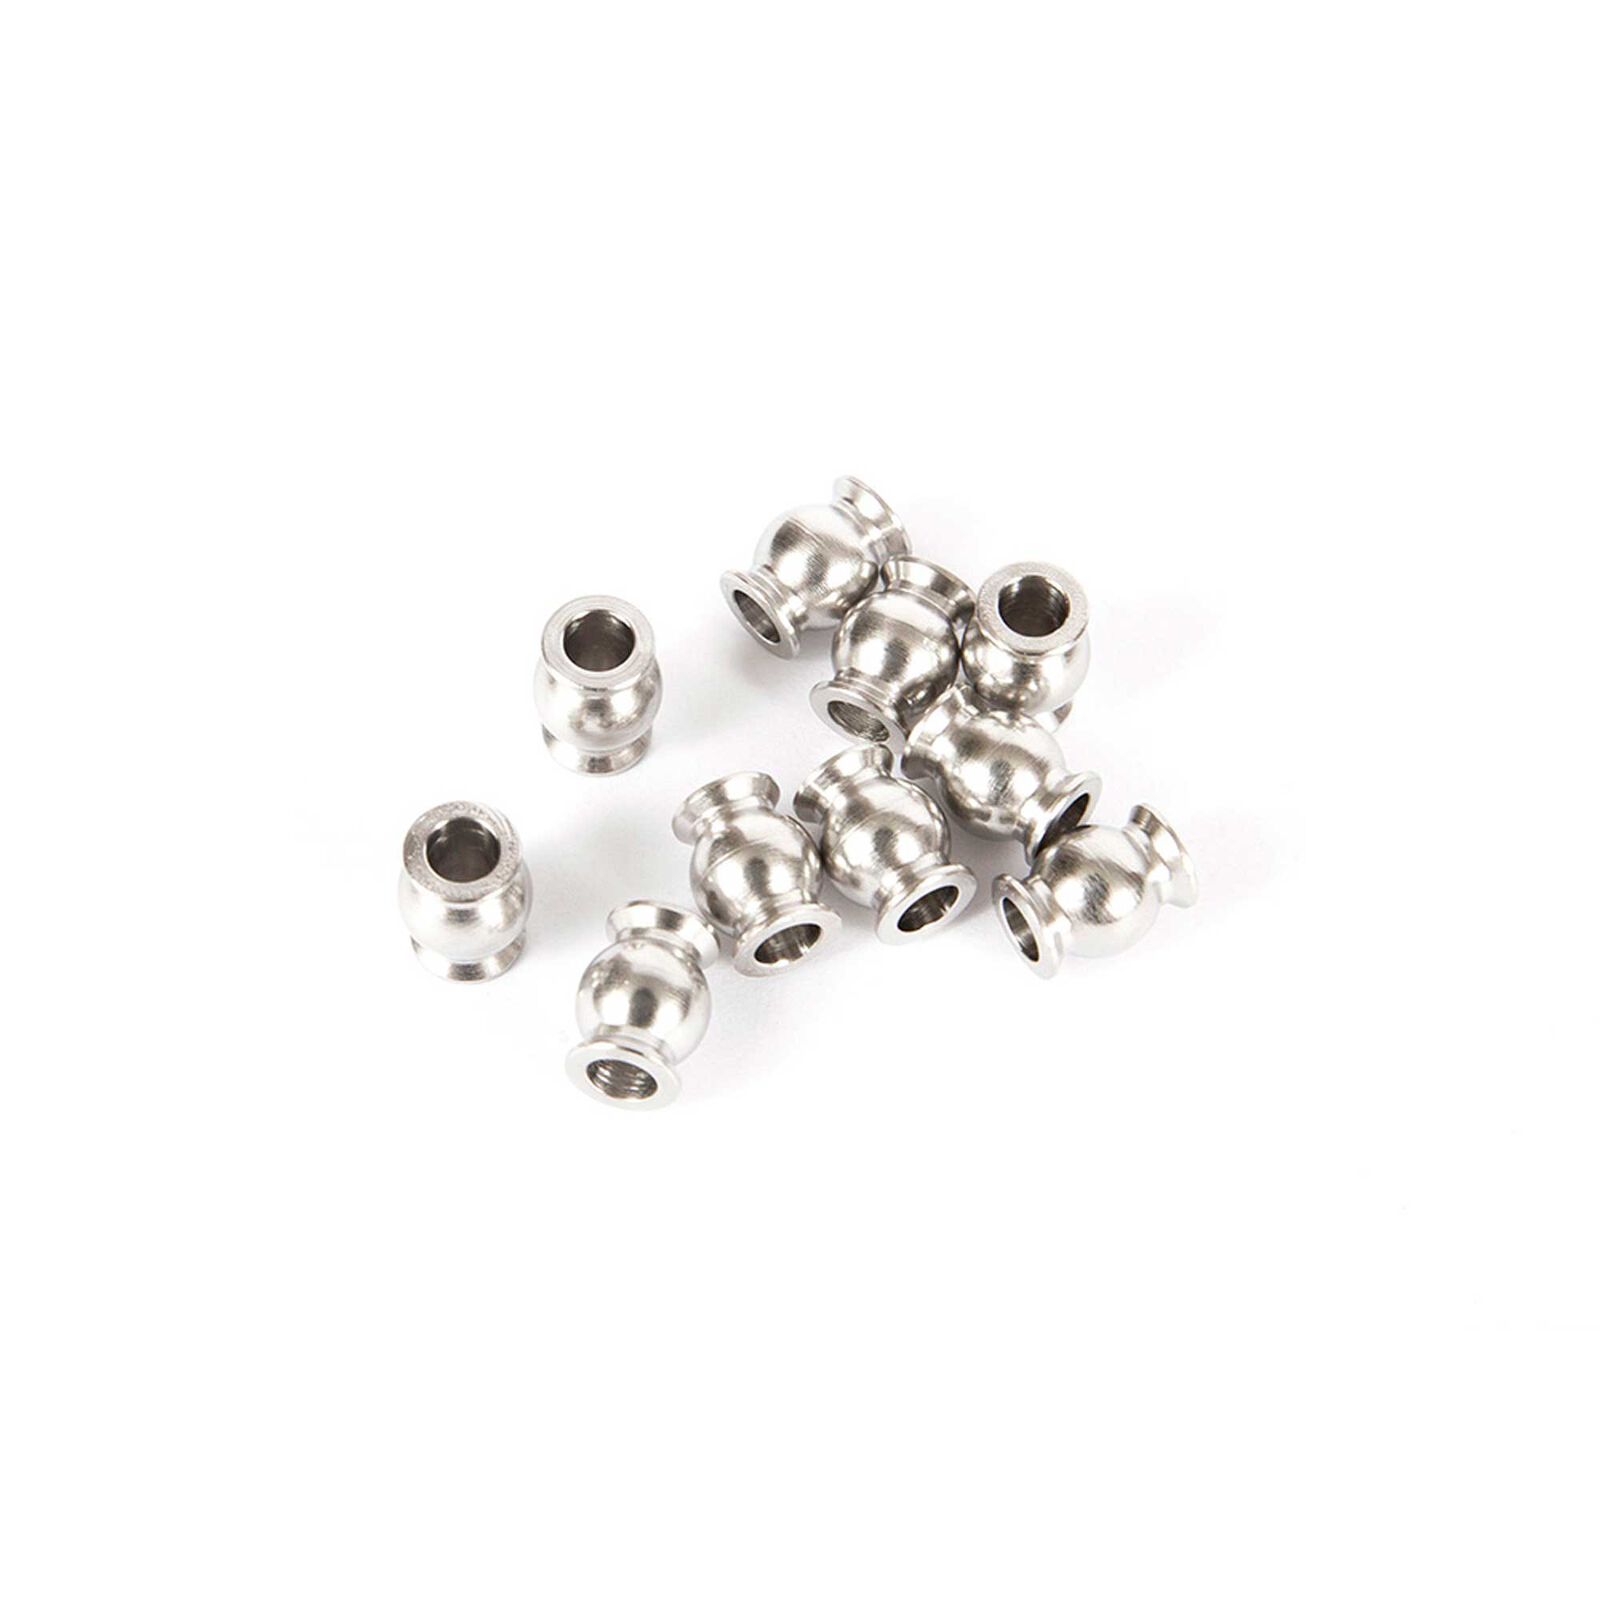 AXIAL Susp Pivot Ball, Stainless Steel 7.5mm (10pc)